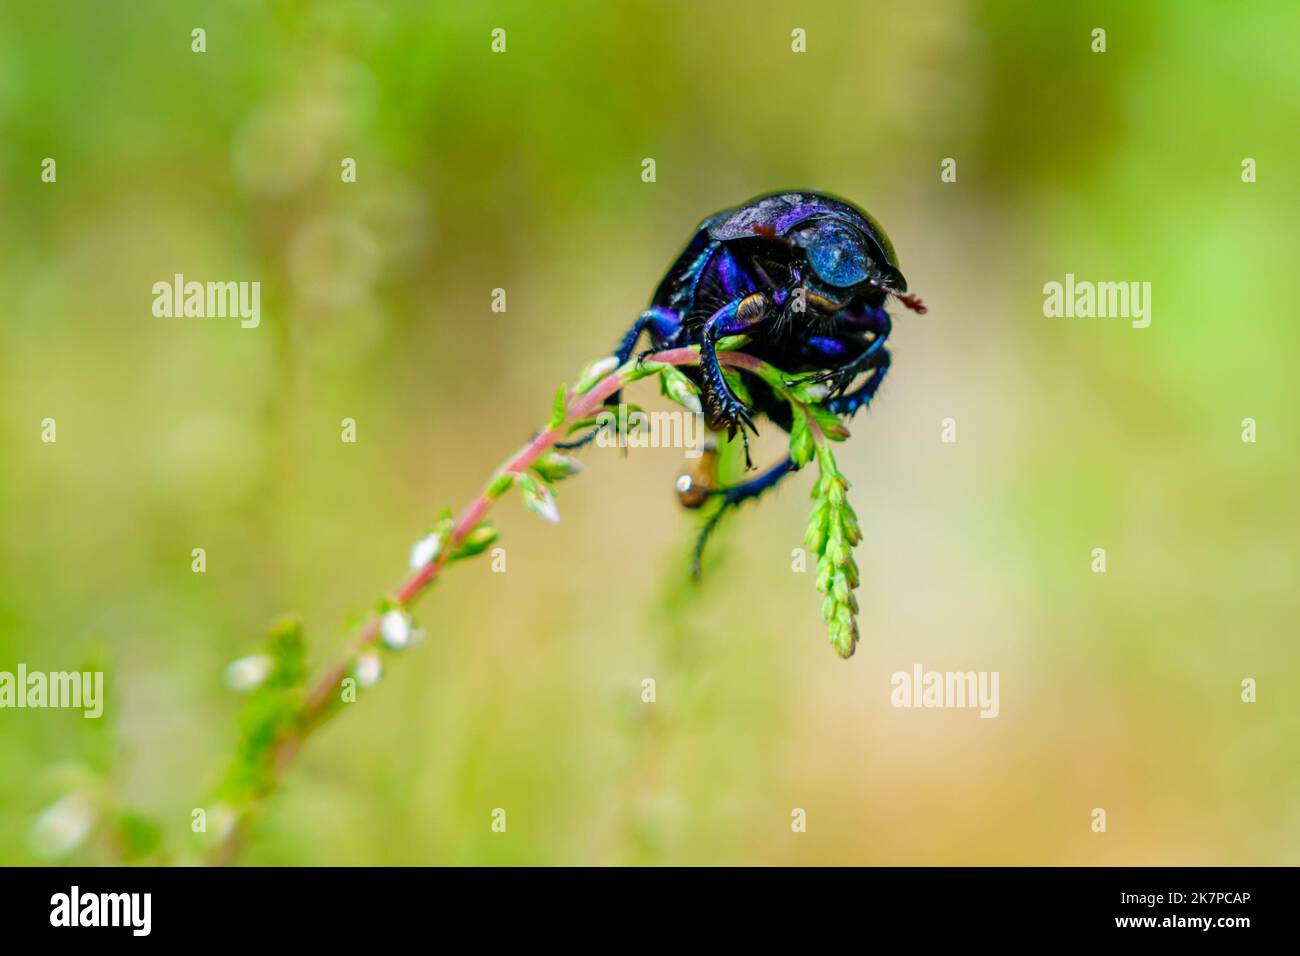 Dor beetle, species of earth-boring dung beetle, Anoplotrupes stercorosus, crawled on a blade of grass, selective focus Stock Photo